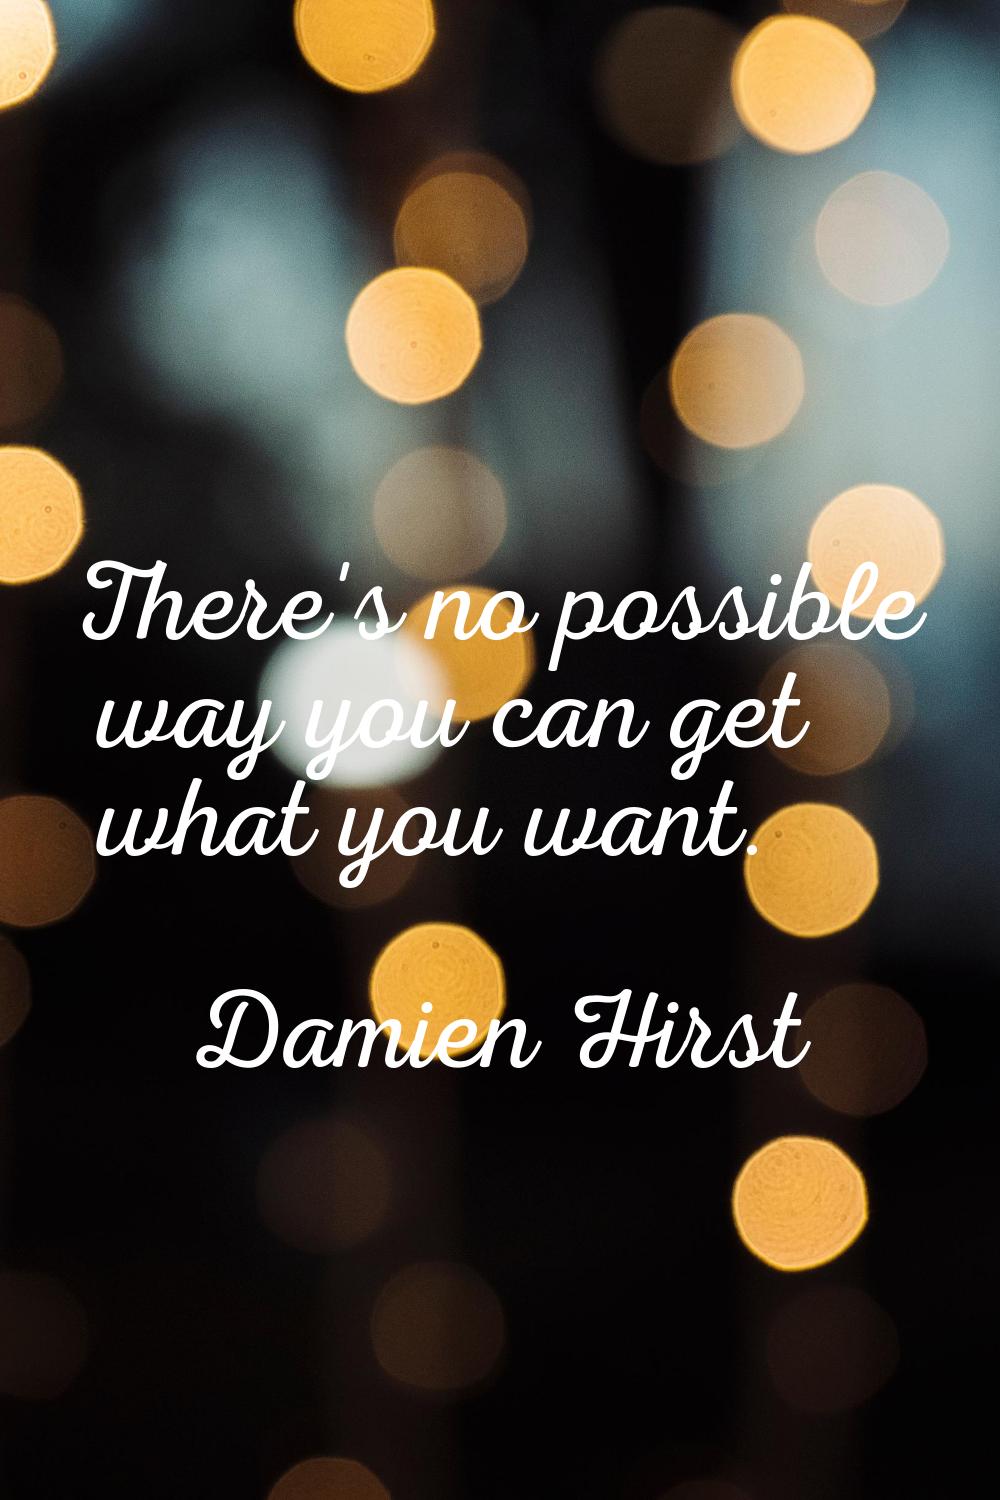 There's no possible way you can get what you want.